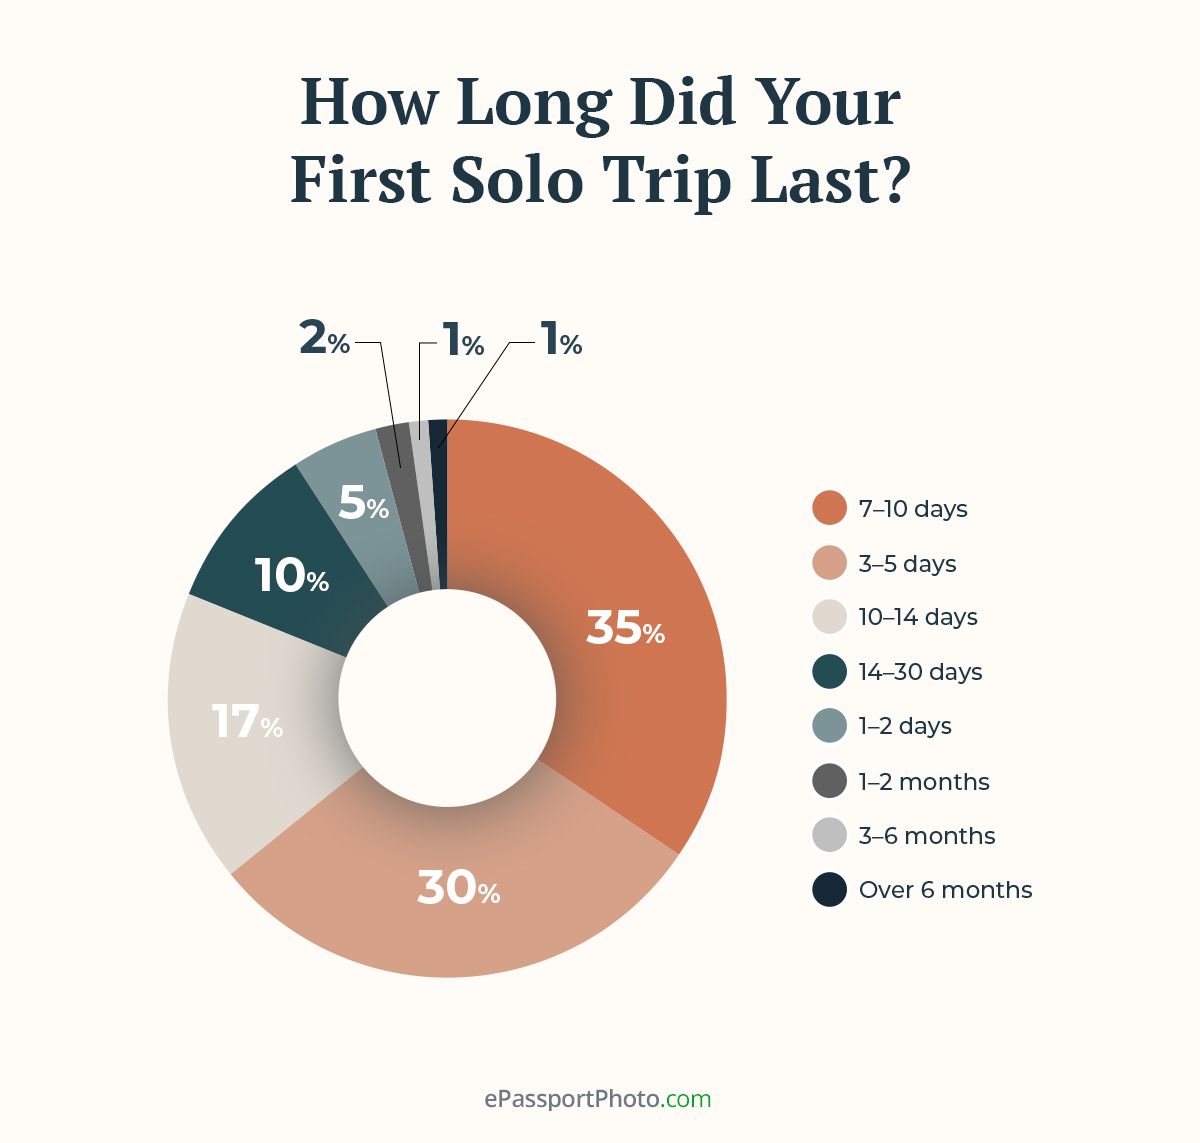 7–10 days is the most popular length for a first solo trip